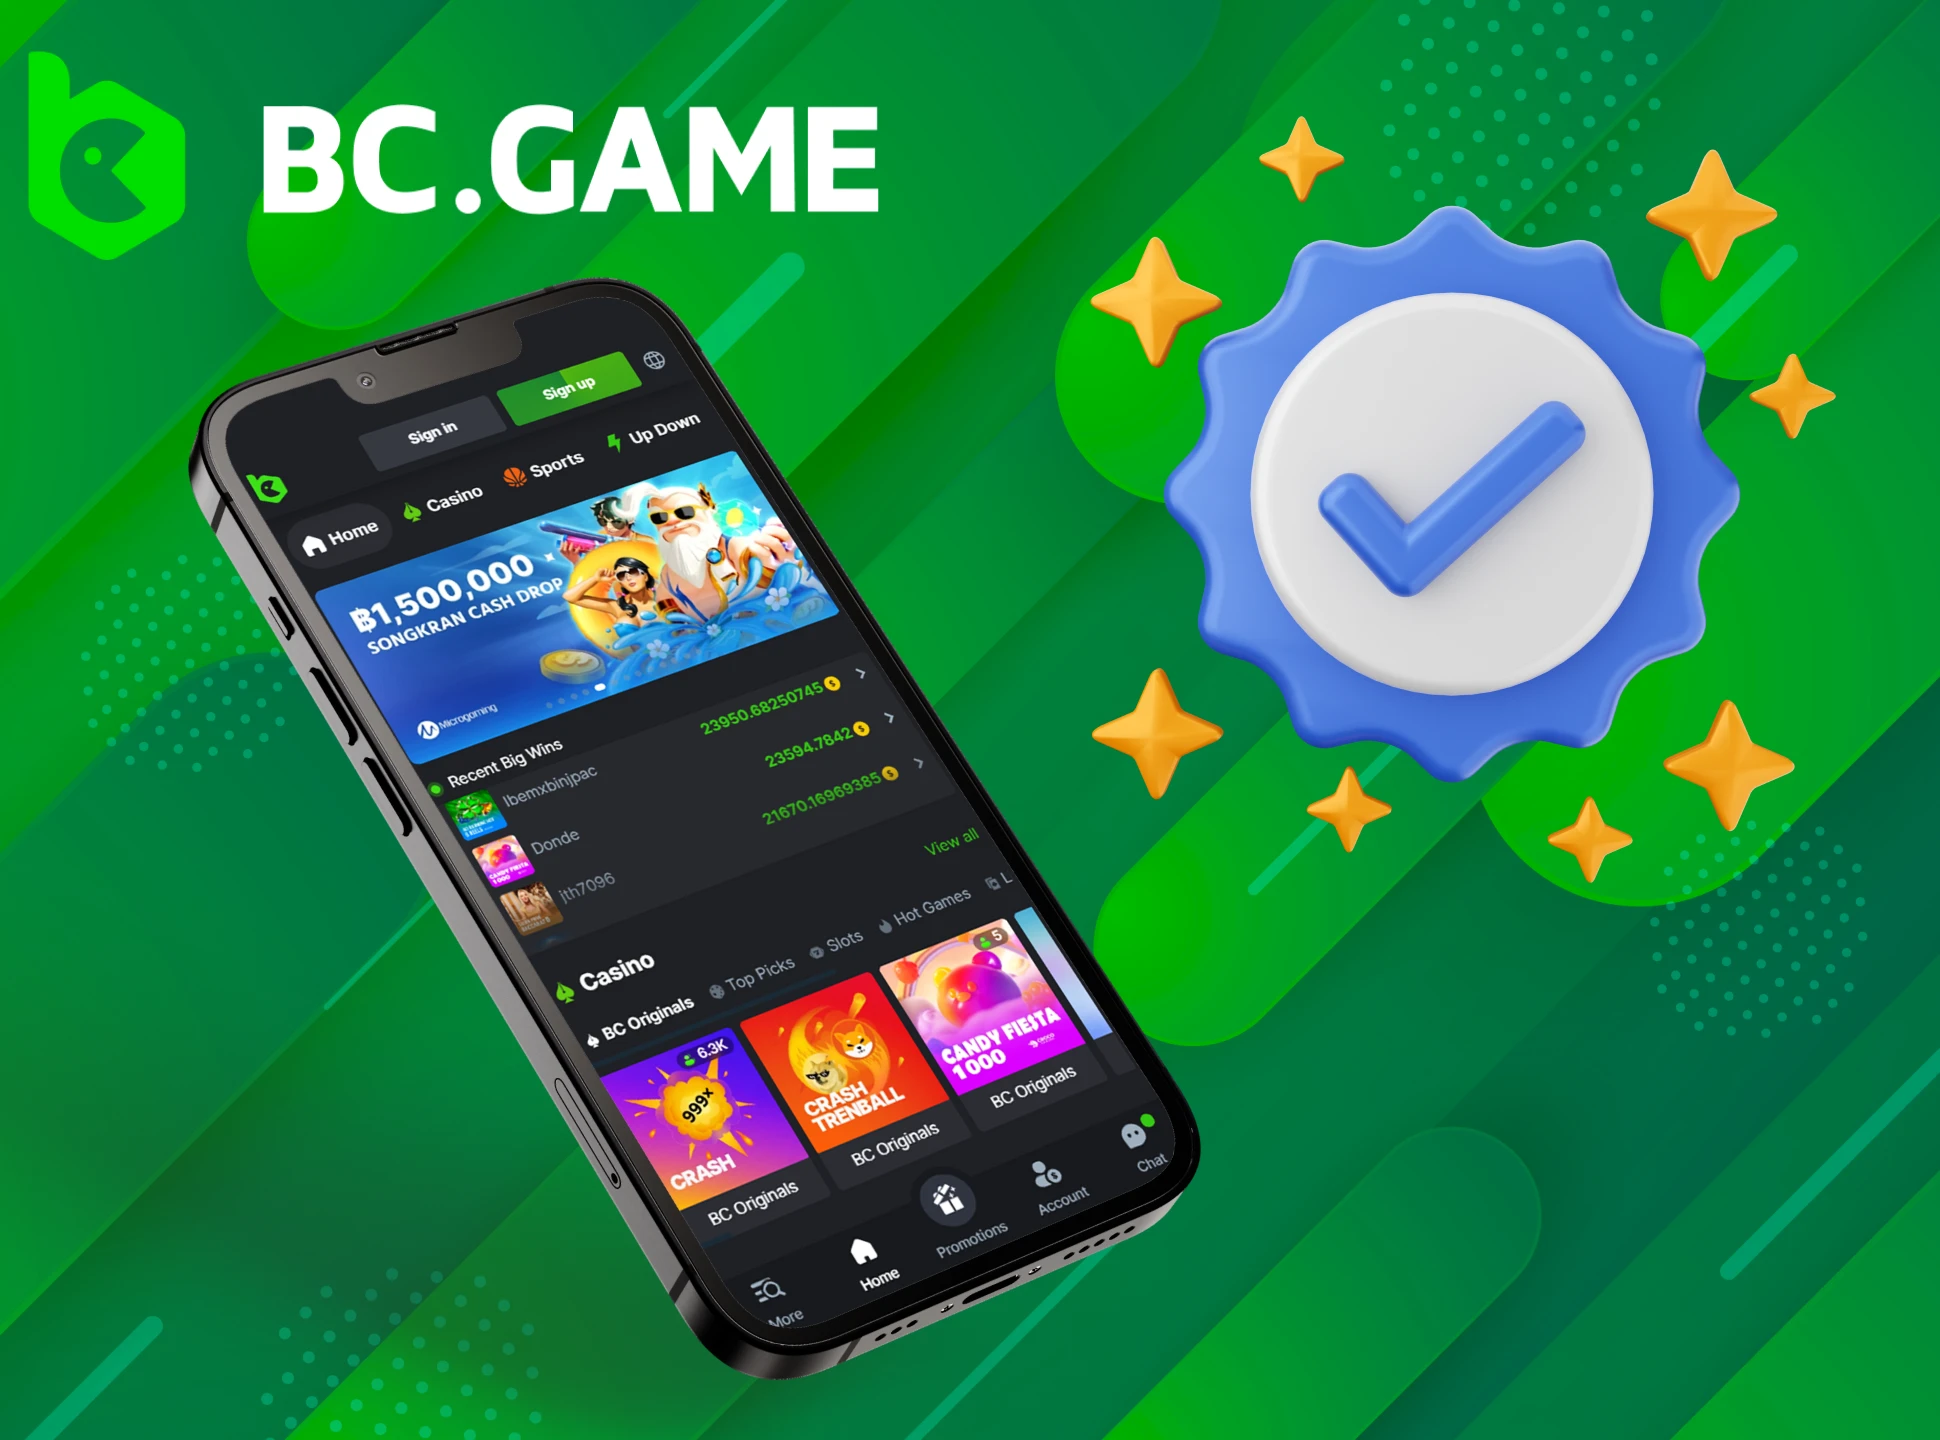 The BC Game app has many benefits for its users.